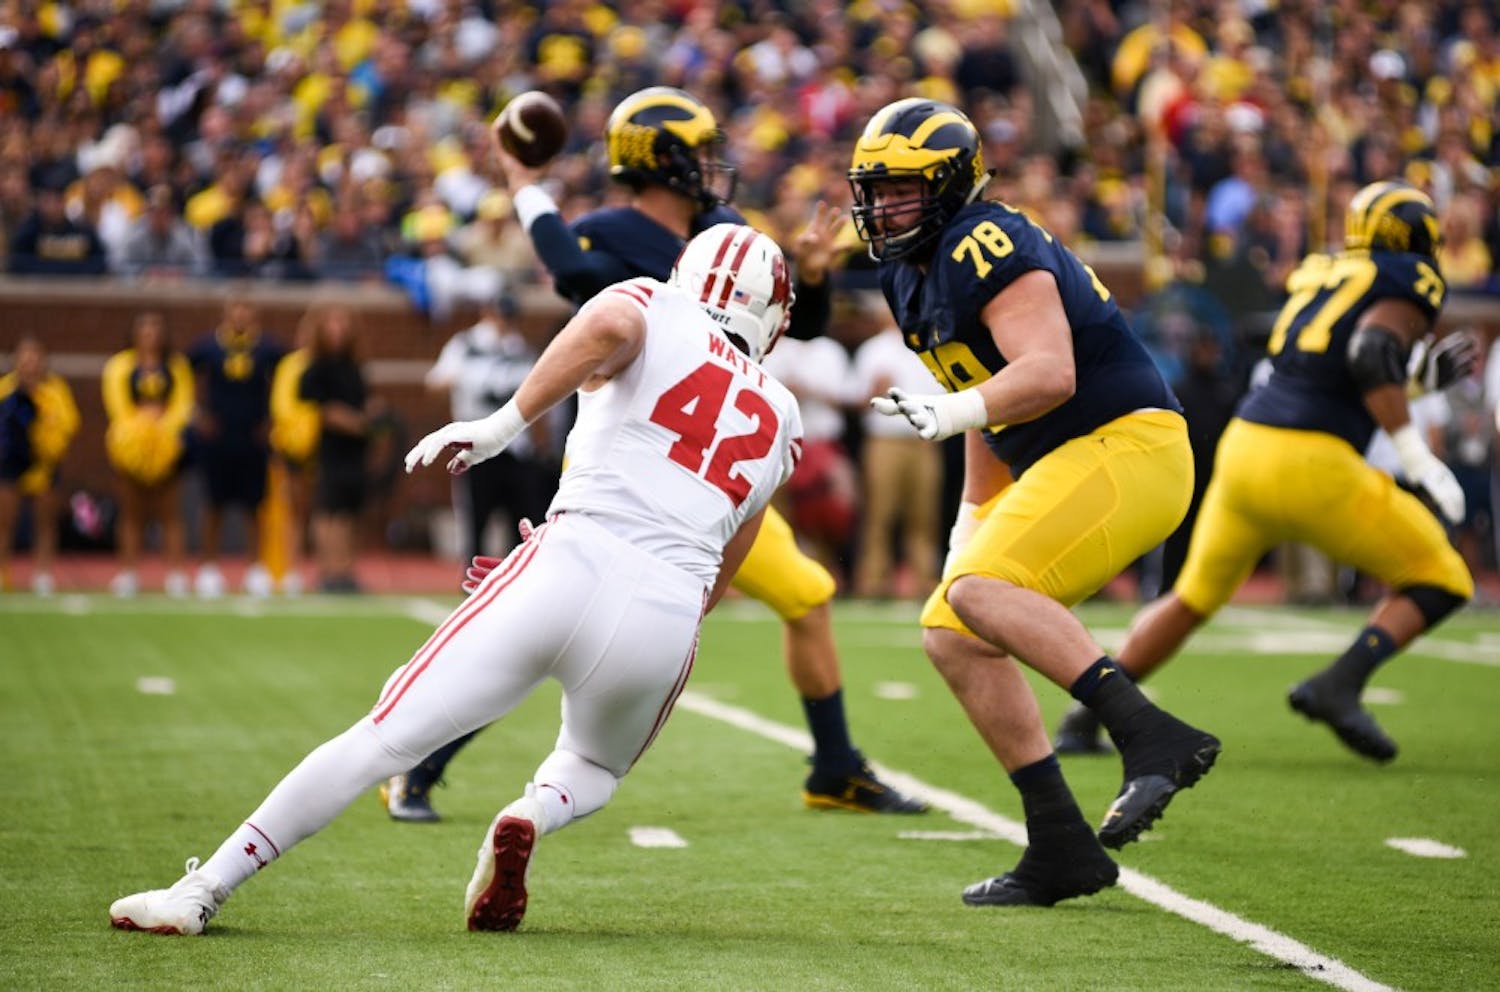 Wisconsin consistently finds "diamonds in the rough," as exemplified by turning T.J. Watt, who's national recruiting rank was 941, into a first round draft pick.